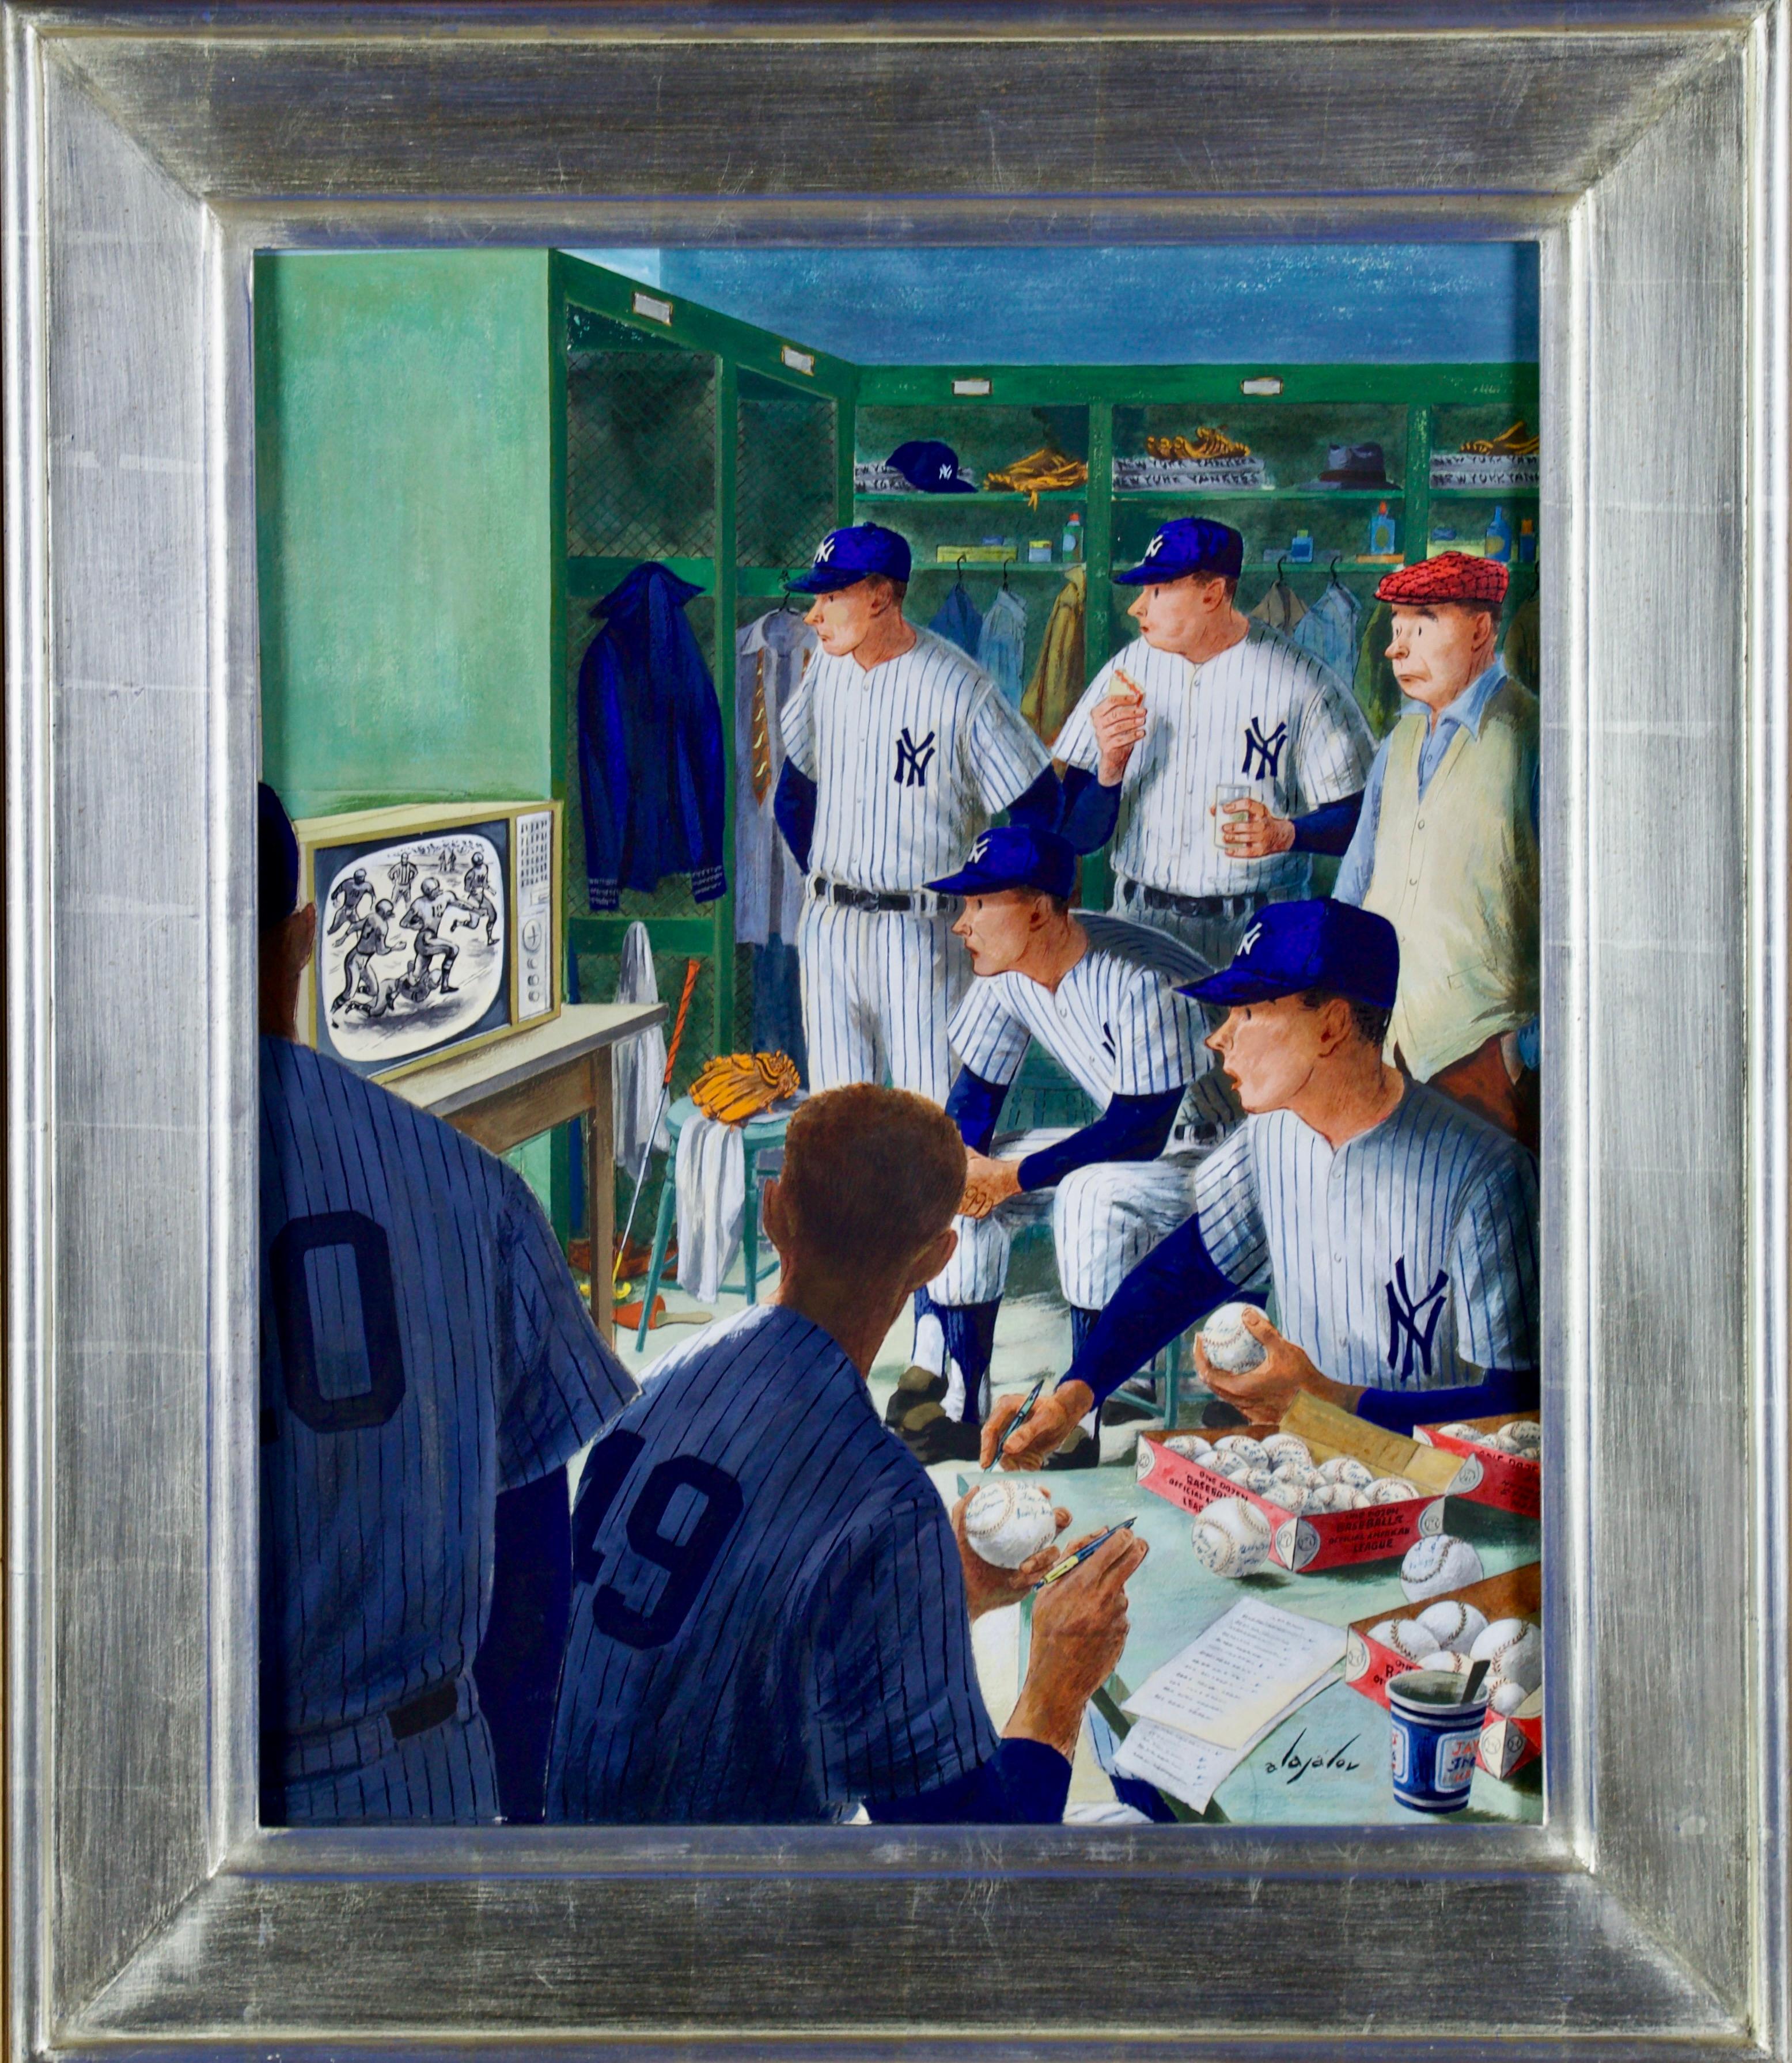 New York Yankees Watching the Football Game - Painting by Constantin Alajalov